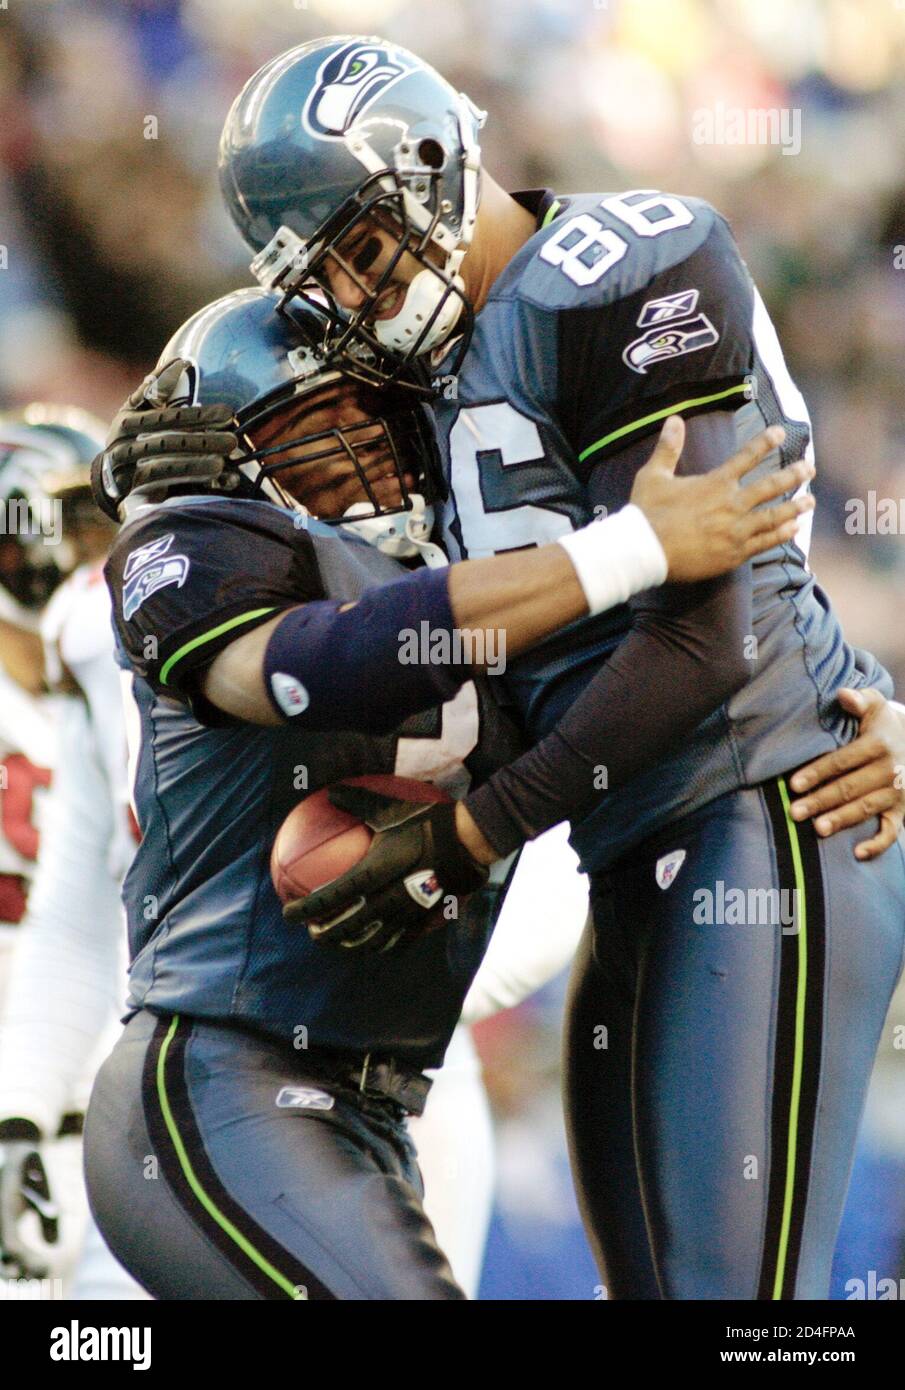 Seattle Seahawks tight end Jeremy Stevens (86) celebrates with teammate Shaun Alexander (L) after his touchdown catch in the third quarter against the Atlanata Falcons. Seattle went on to beat the Falcons 28-26 to win their first NFC West division title. REUTERS/Robert Sorbo  RSS Stock Photo